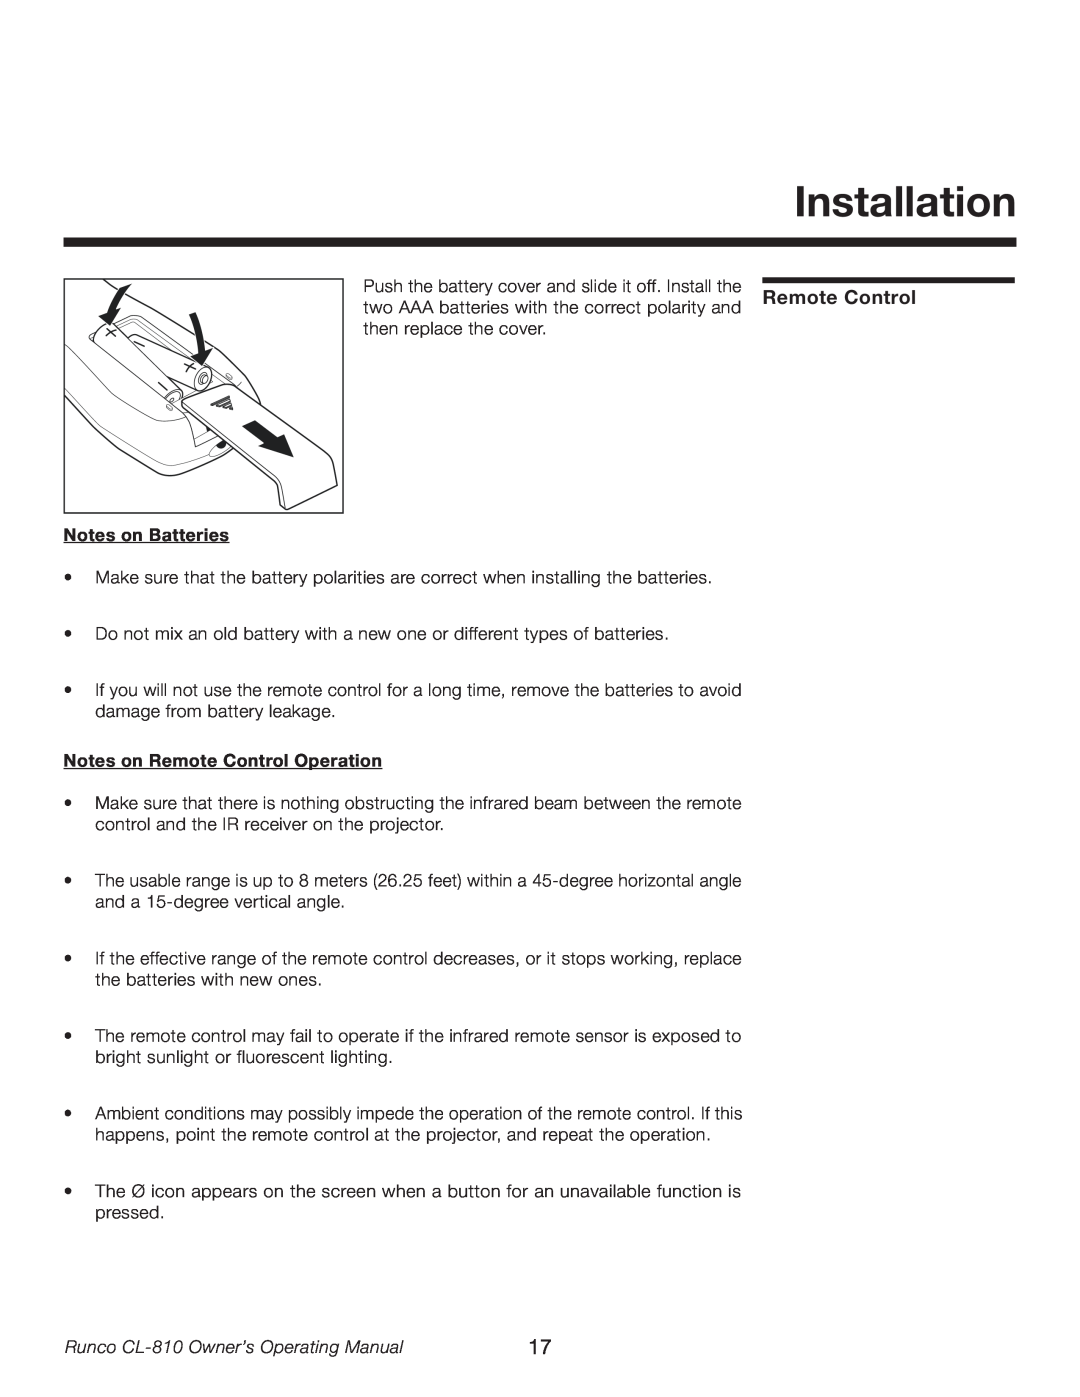 Runco CL-810 manual Installation, Notes on Batteries, Notes on Remote Control Operation 